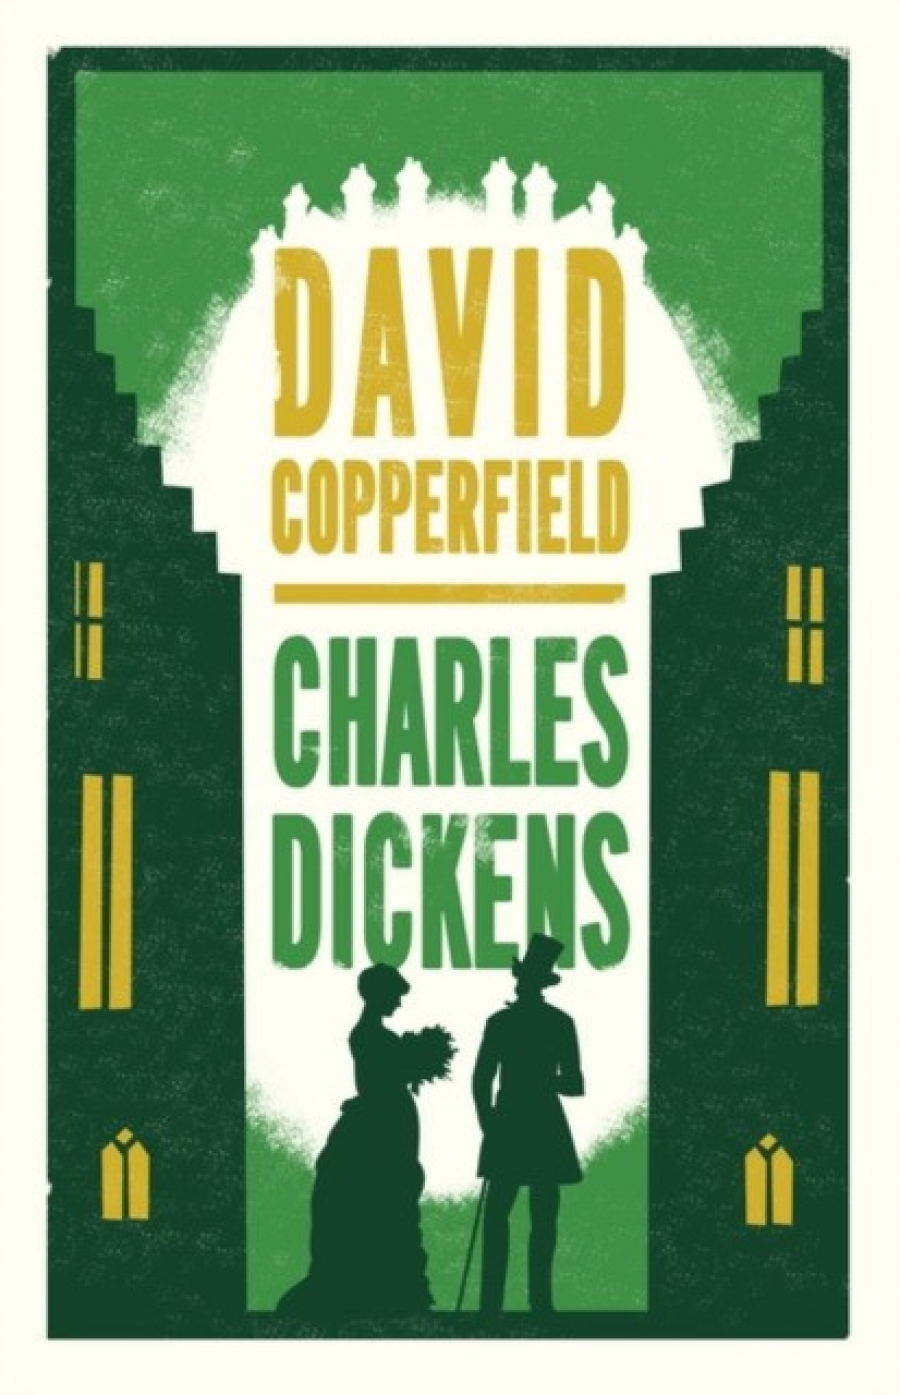 Dickens Charles David Copperfield 